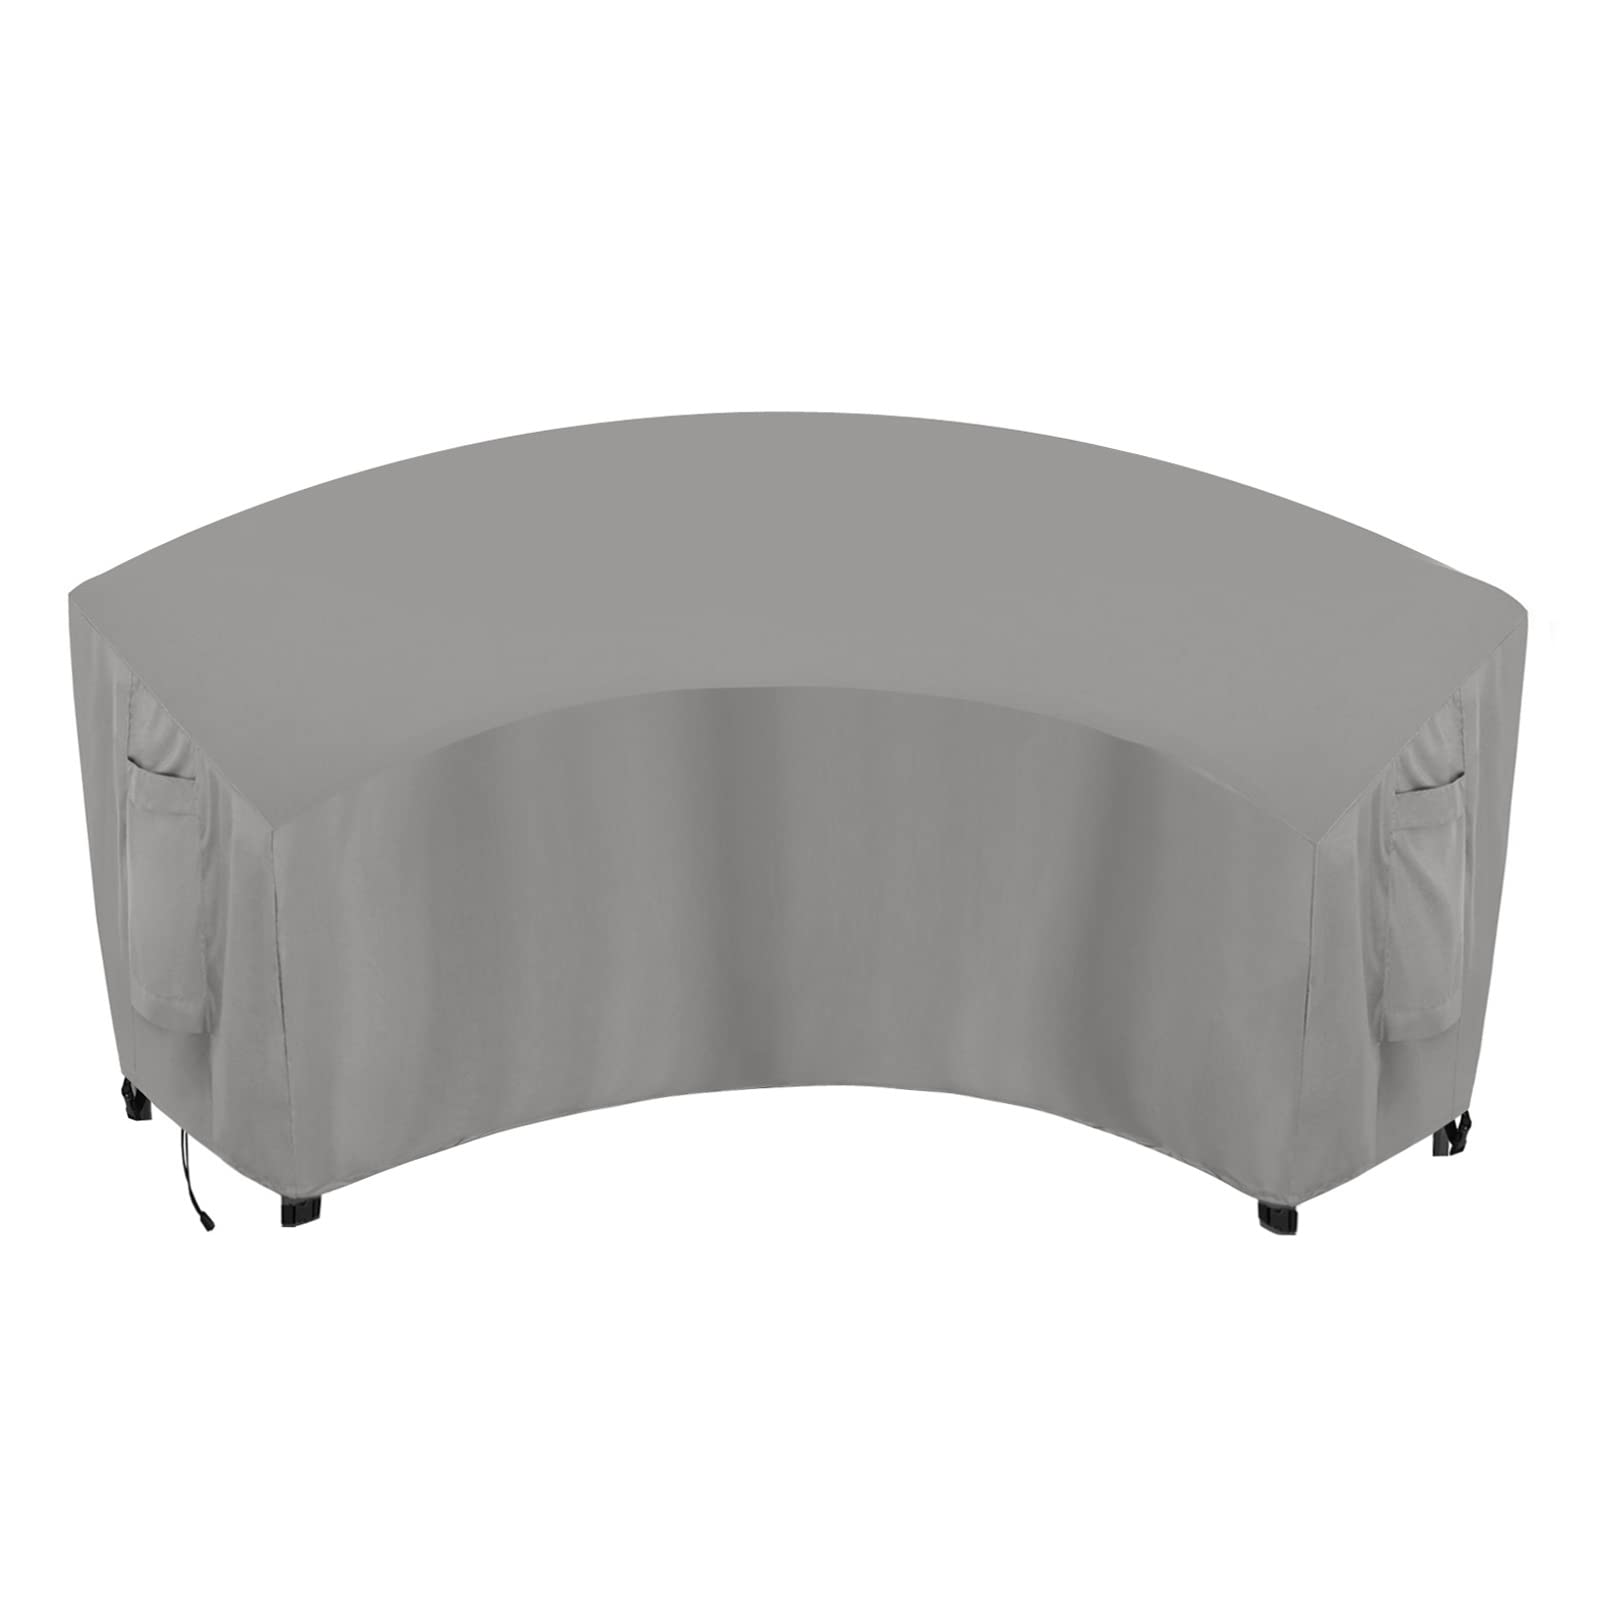 Outdoorlines Waterproof Curved Outdoor Sectional Cover - Uv Resistant Windproof Patio Sectional Sofa Covers For Deck, Lawn And B